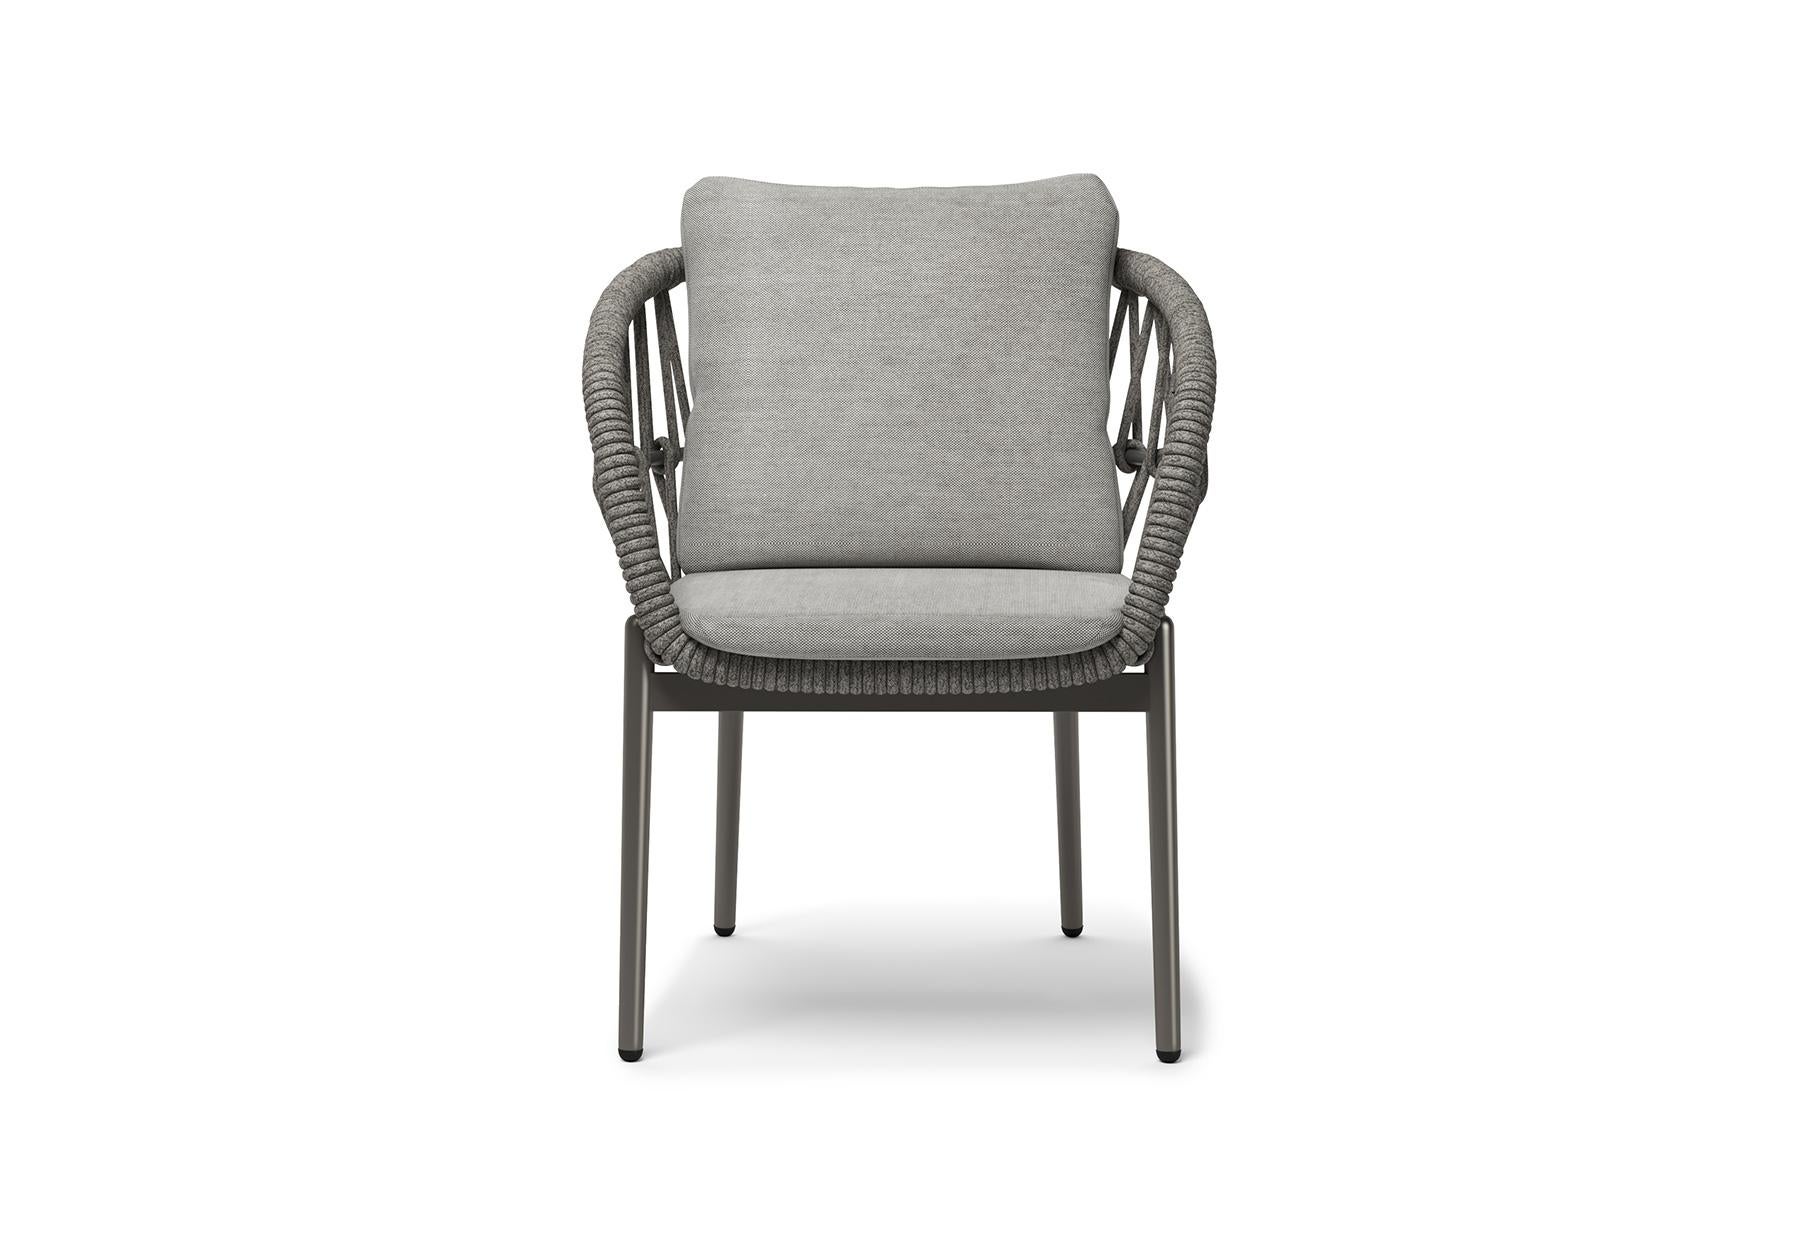 Gemma is a rope and aluminium garden chair.‎

The Gemma Collection is a powerful sketch, synthesizes its rounded lines and comfort, it incorporates the power of contrast into the entire design and deepens the open space experience.‎ The functional